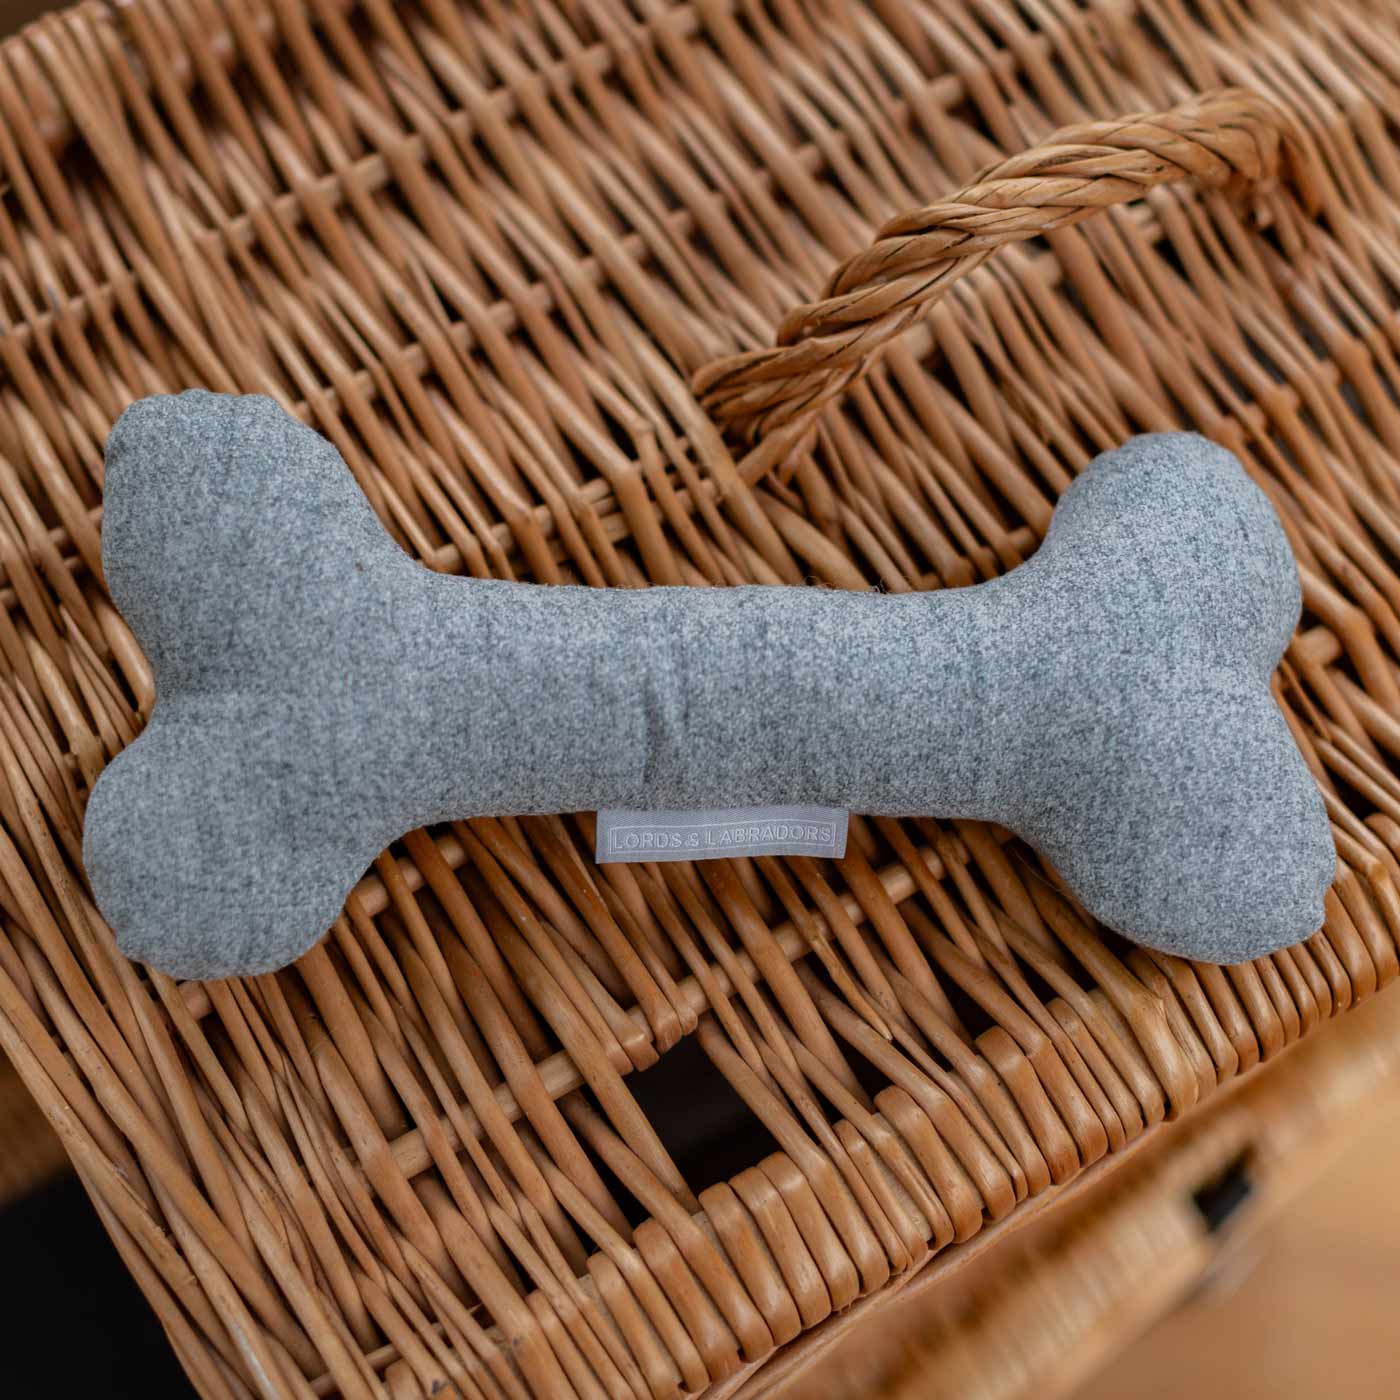 Present the perfect pet play-time with our luxury dog bone toy in stunning Inchmurrin Iceberg Light Grey! Available to personalise now at Lords & Labradors, Shop Luxury Dog Toys Online